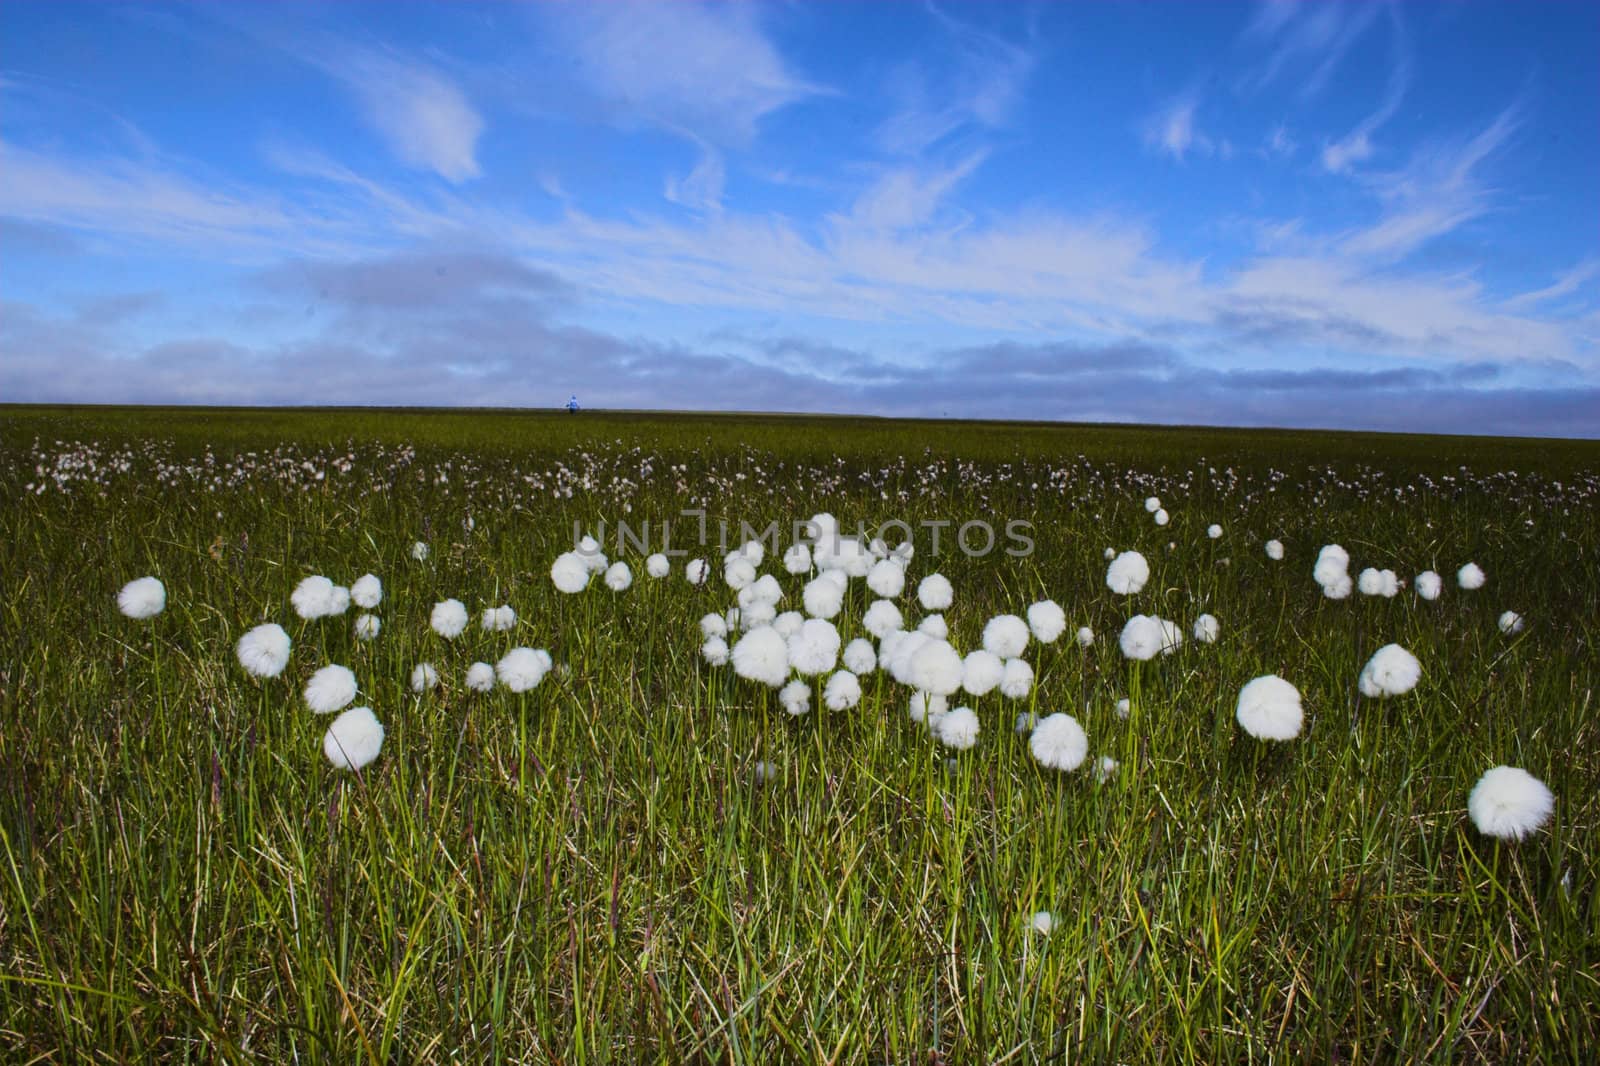 Arctic flowers bloom in the wind during polar summer